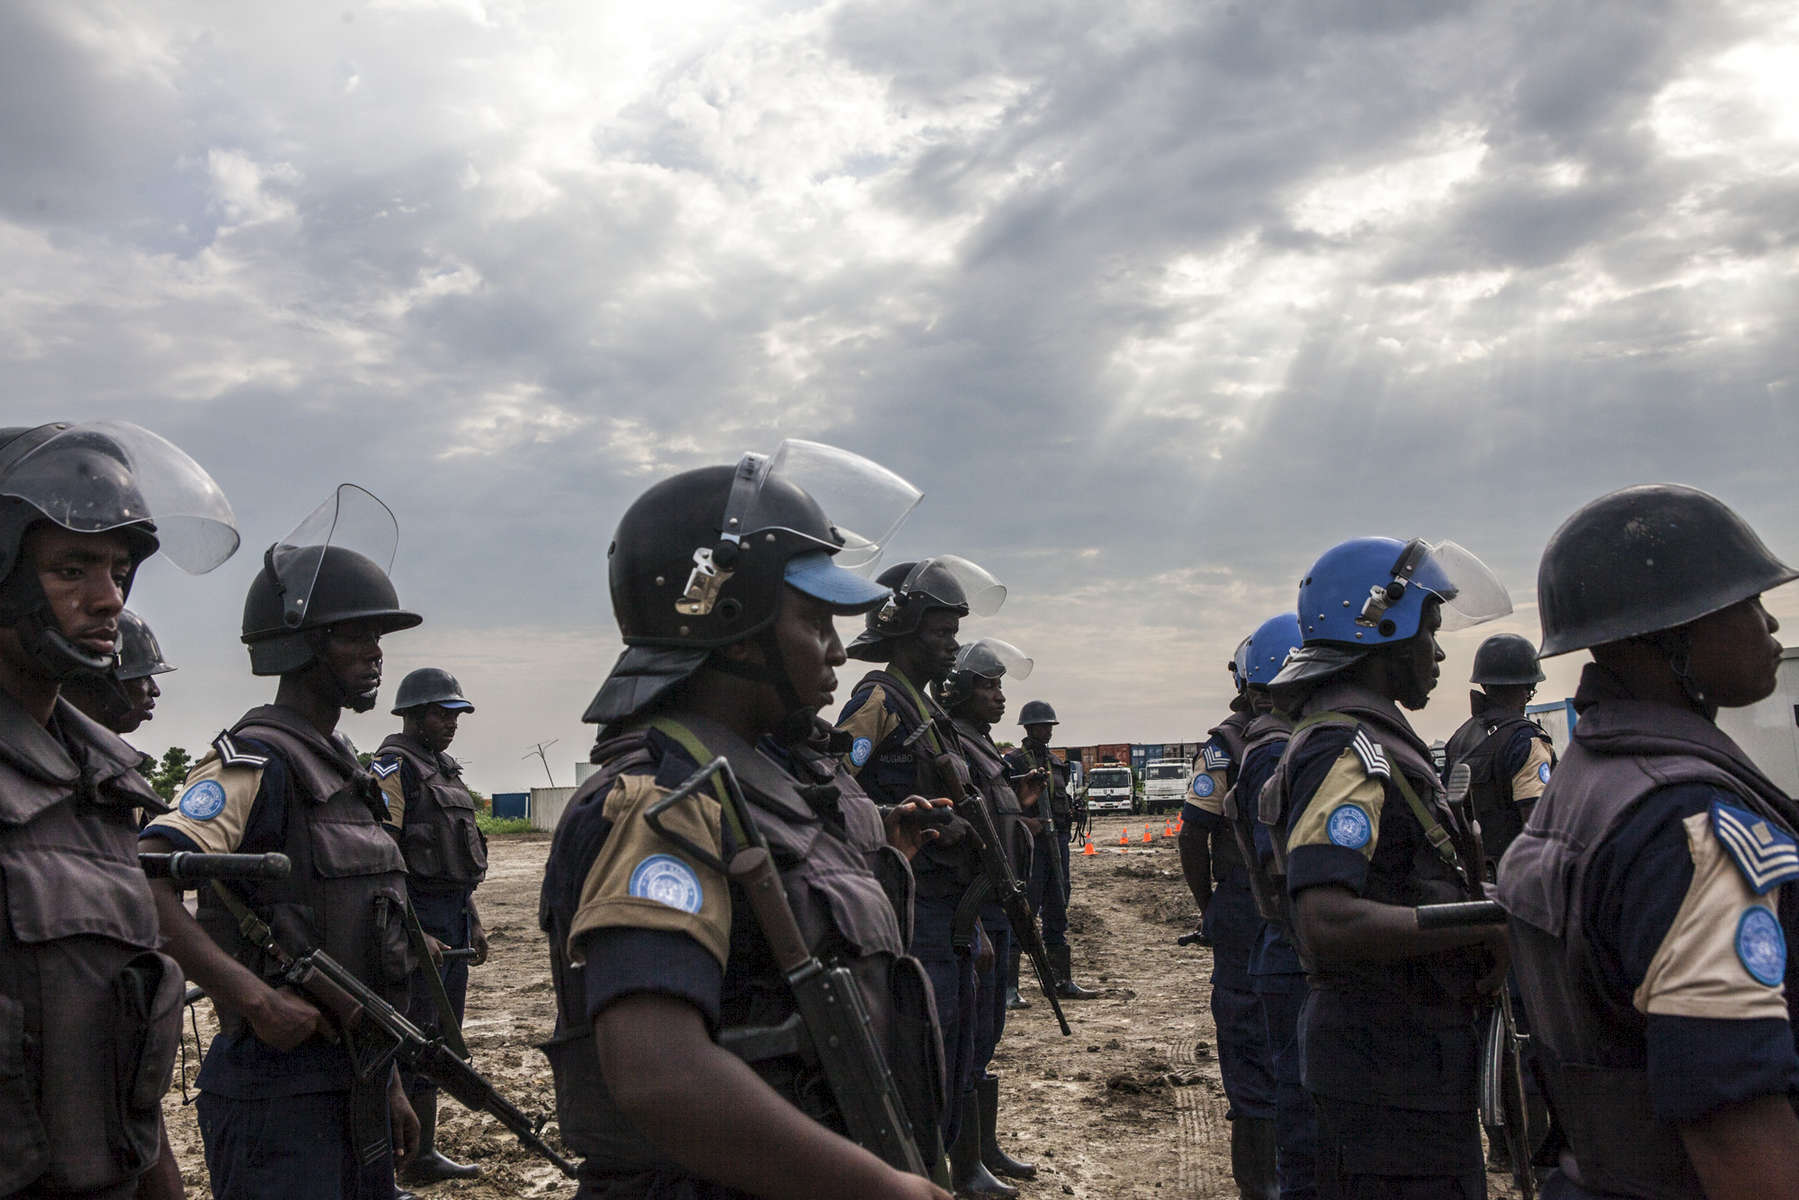 Members of the United Nations Police prepare to search the Protection of Civilians (POC) site of contraband at the United Nations Mission in South Sudan (UNMISS) compound in Malakal, South Sudan on Friday, July 15, 2016. The Malakal POC site houses over 32,000 displaced people mainly from the Shilluk and Nuer tribes. In February of this year, members of the Dinka tribe, who resided in the camp at the time, carried out a coordinated attack within the site leading to the destruction of hundreds of shelters and many deaths. Since then, most members of the Dinka tribe have fled to Malakal town where they occupy the homes of those still displaced. The UN has assured the displaced people that increased security measures around the camp will protect them from any further attack. Most of the displace are not convinced. 